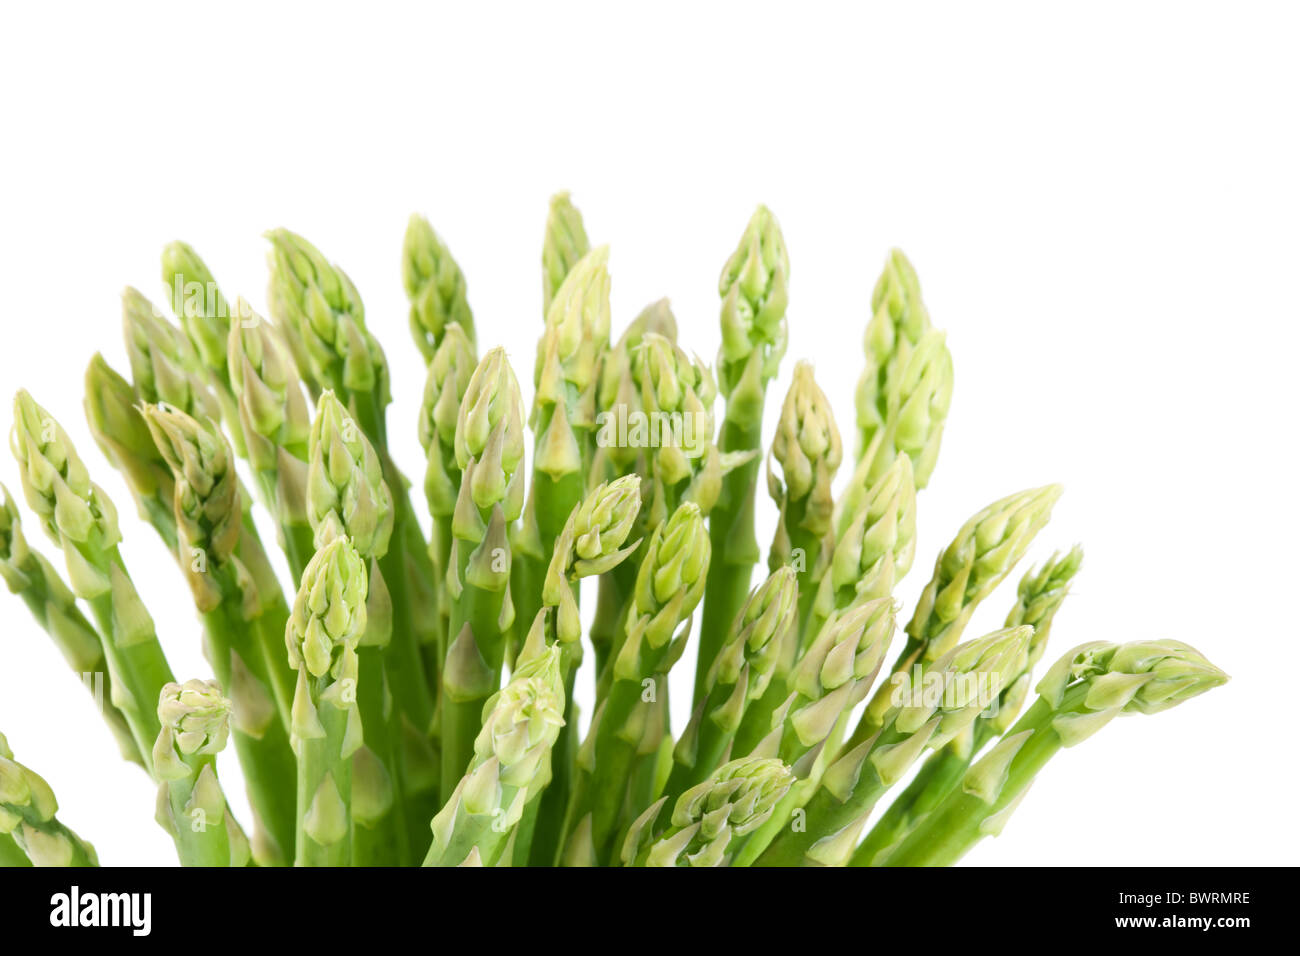 Sheaf of asparagus on a white background. Stock Photo